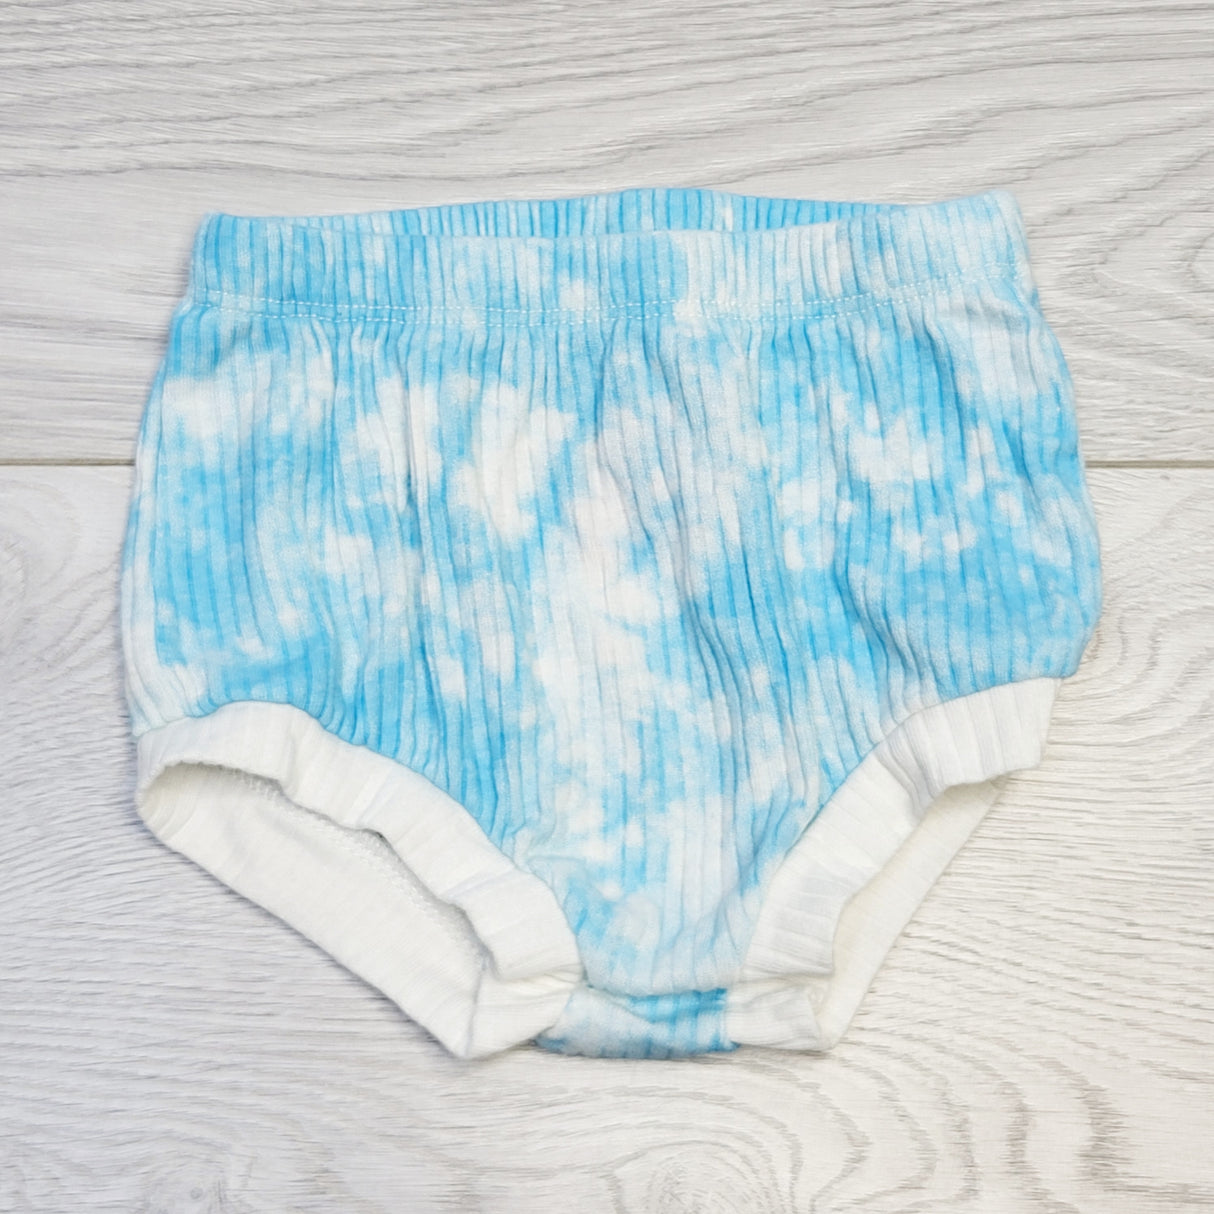 CHOL1 - Cat and Jack blue tie dye style bloomers, size 0-3 months